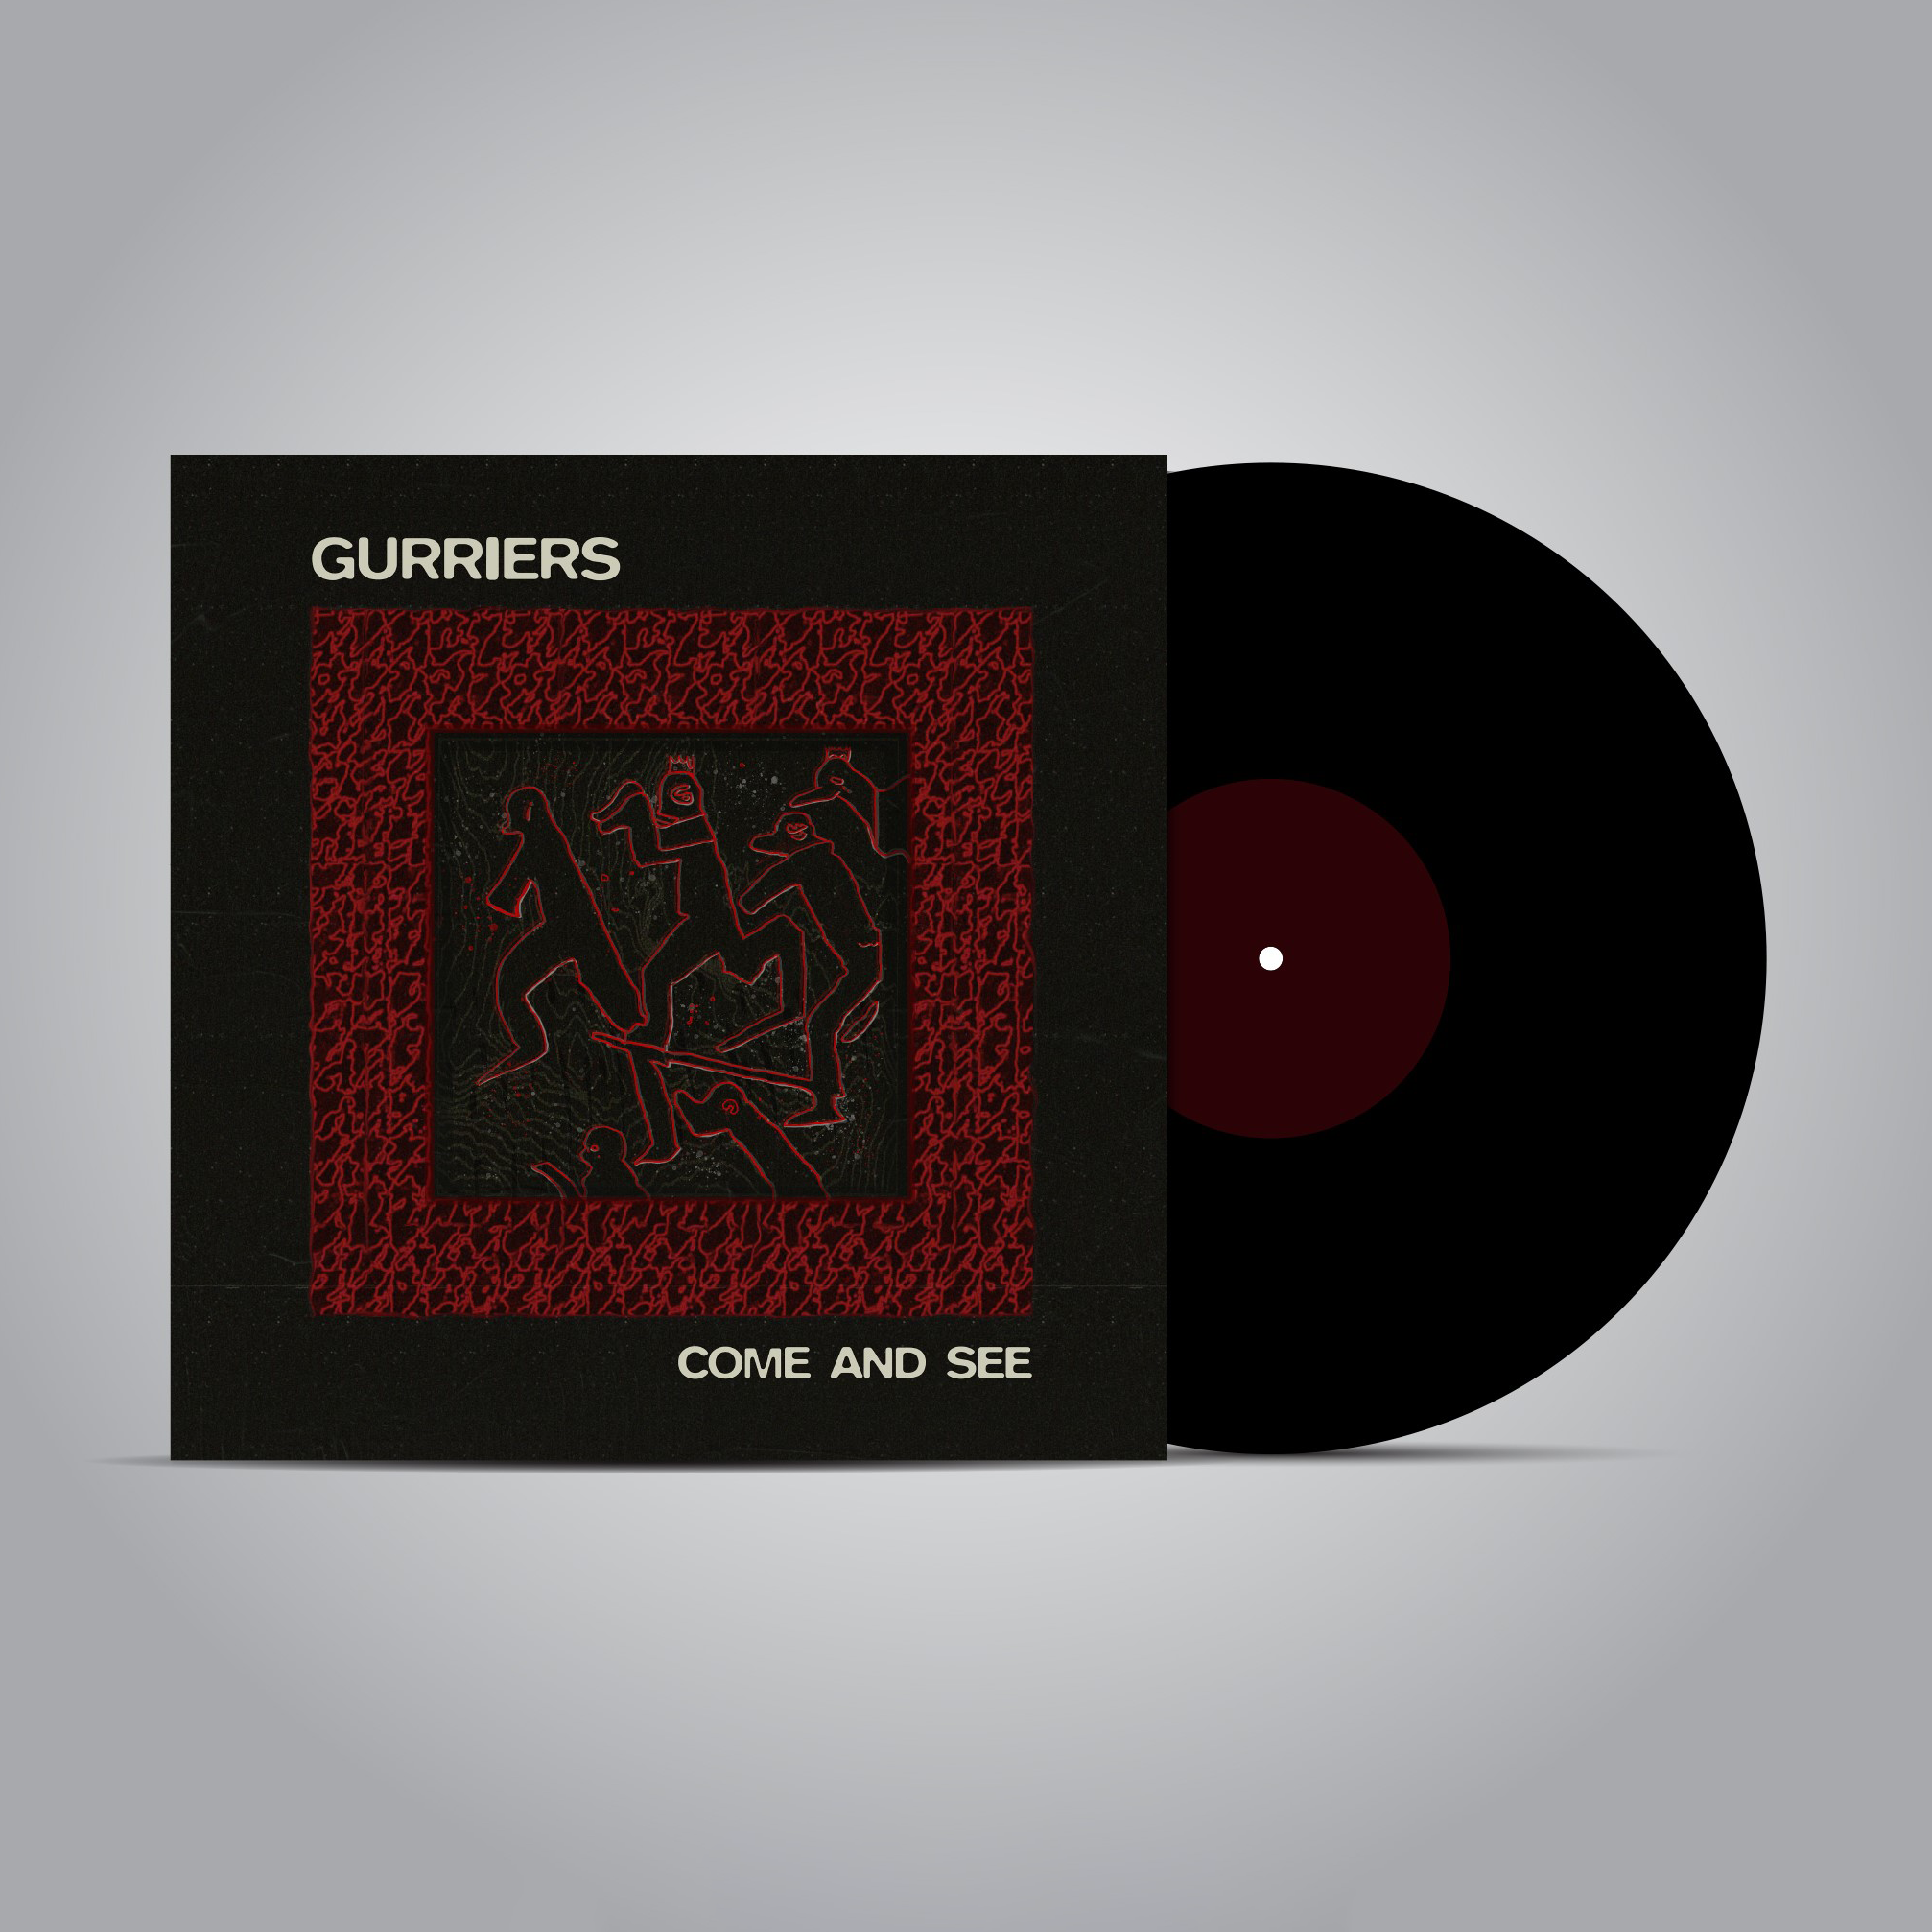 Gurriers - Come And See: Vinyl LP